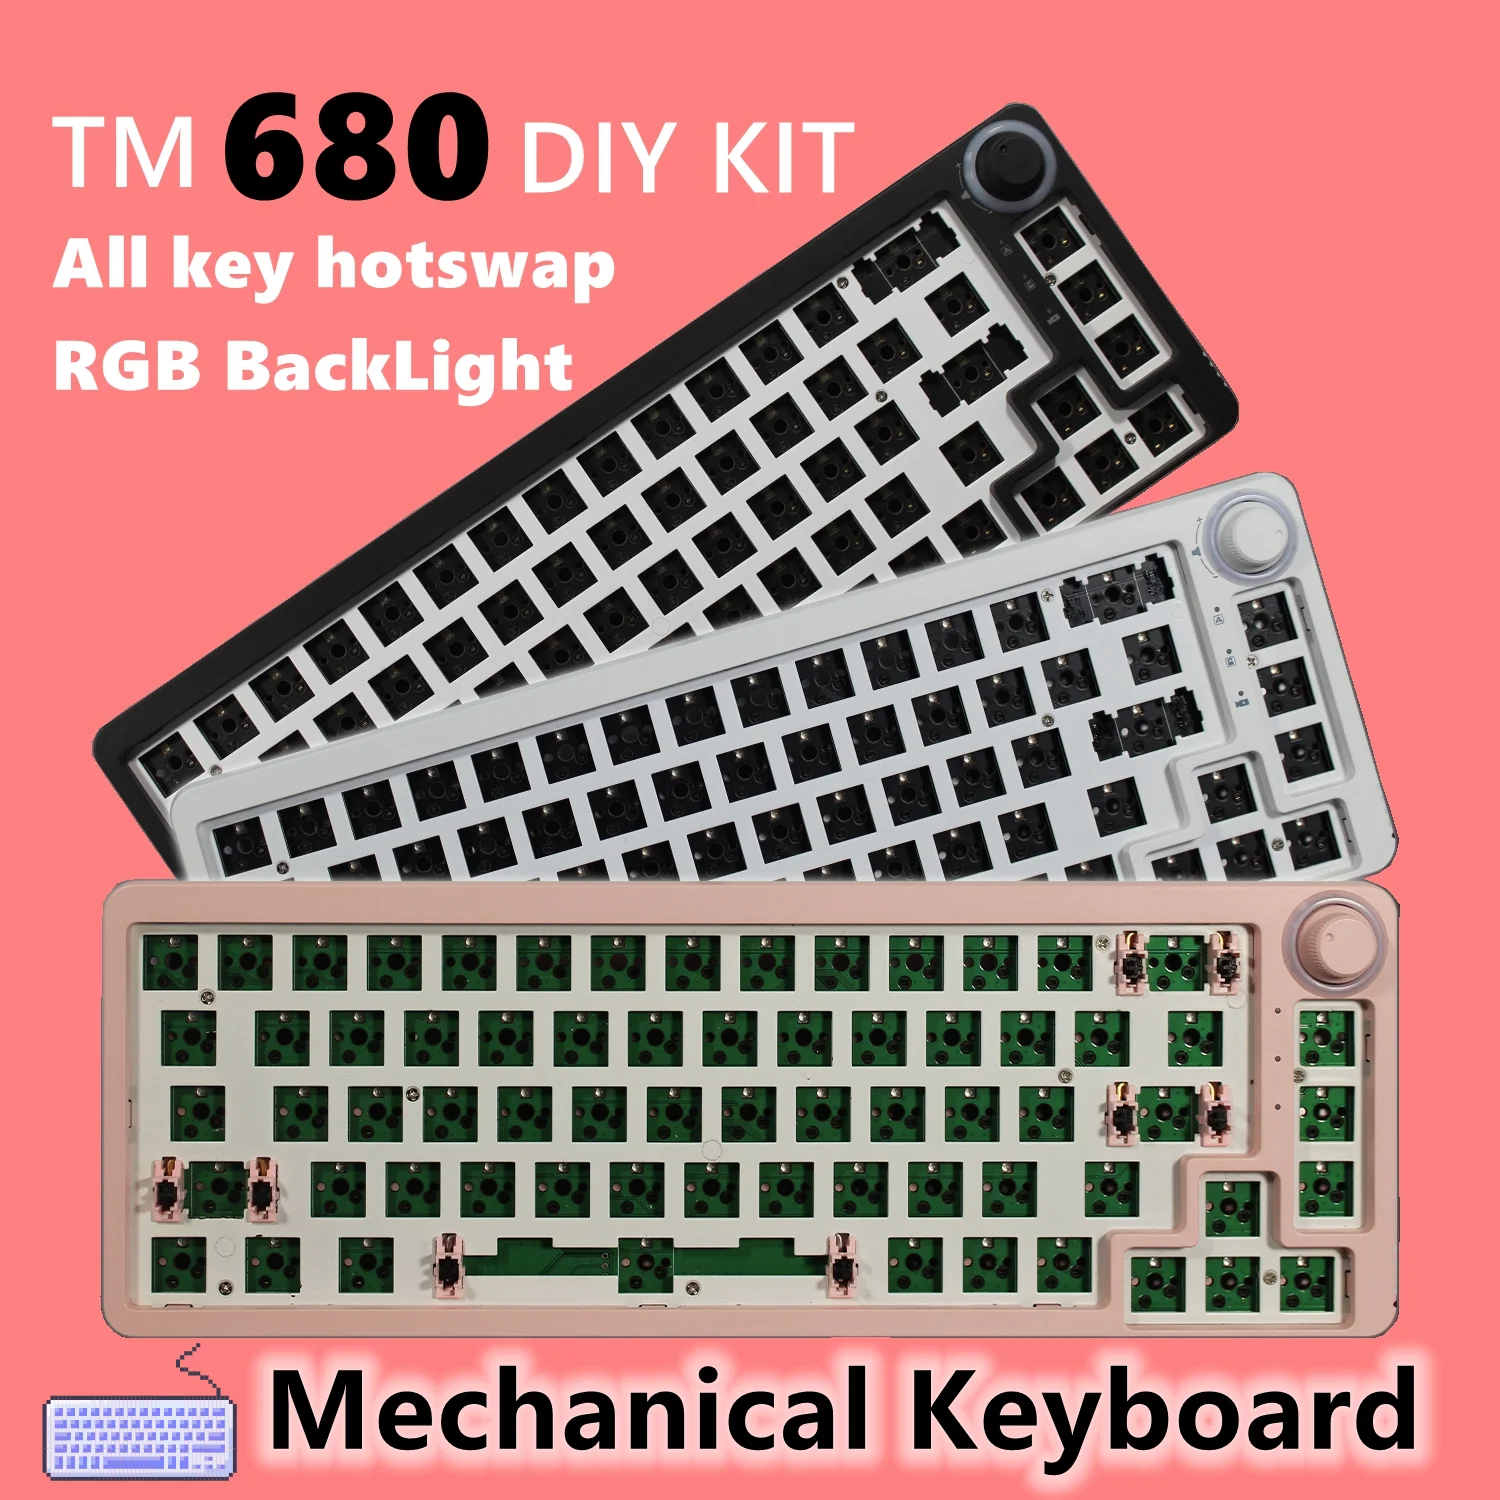 

TM680 Hot Swap 3 Mode Mechanical Keyboard DIY Kit Wired RGB Light Compatiable with 3/5 Pins for Cherry MX Gateron Kailh Switches